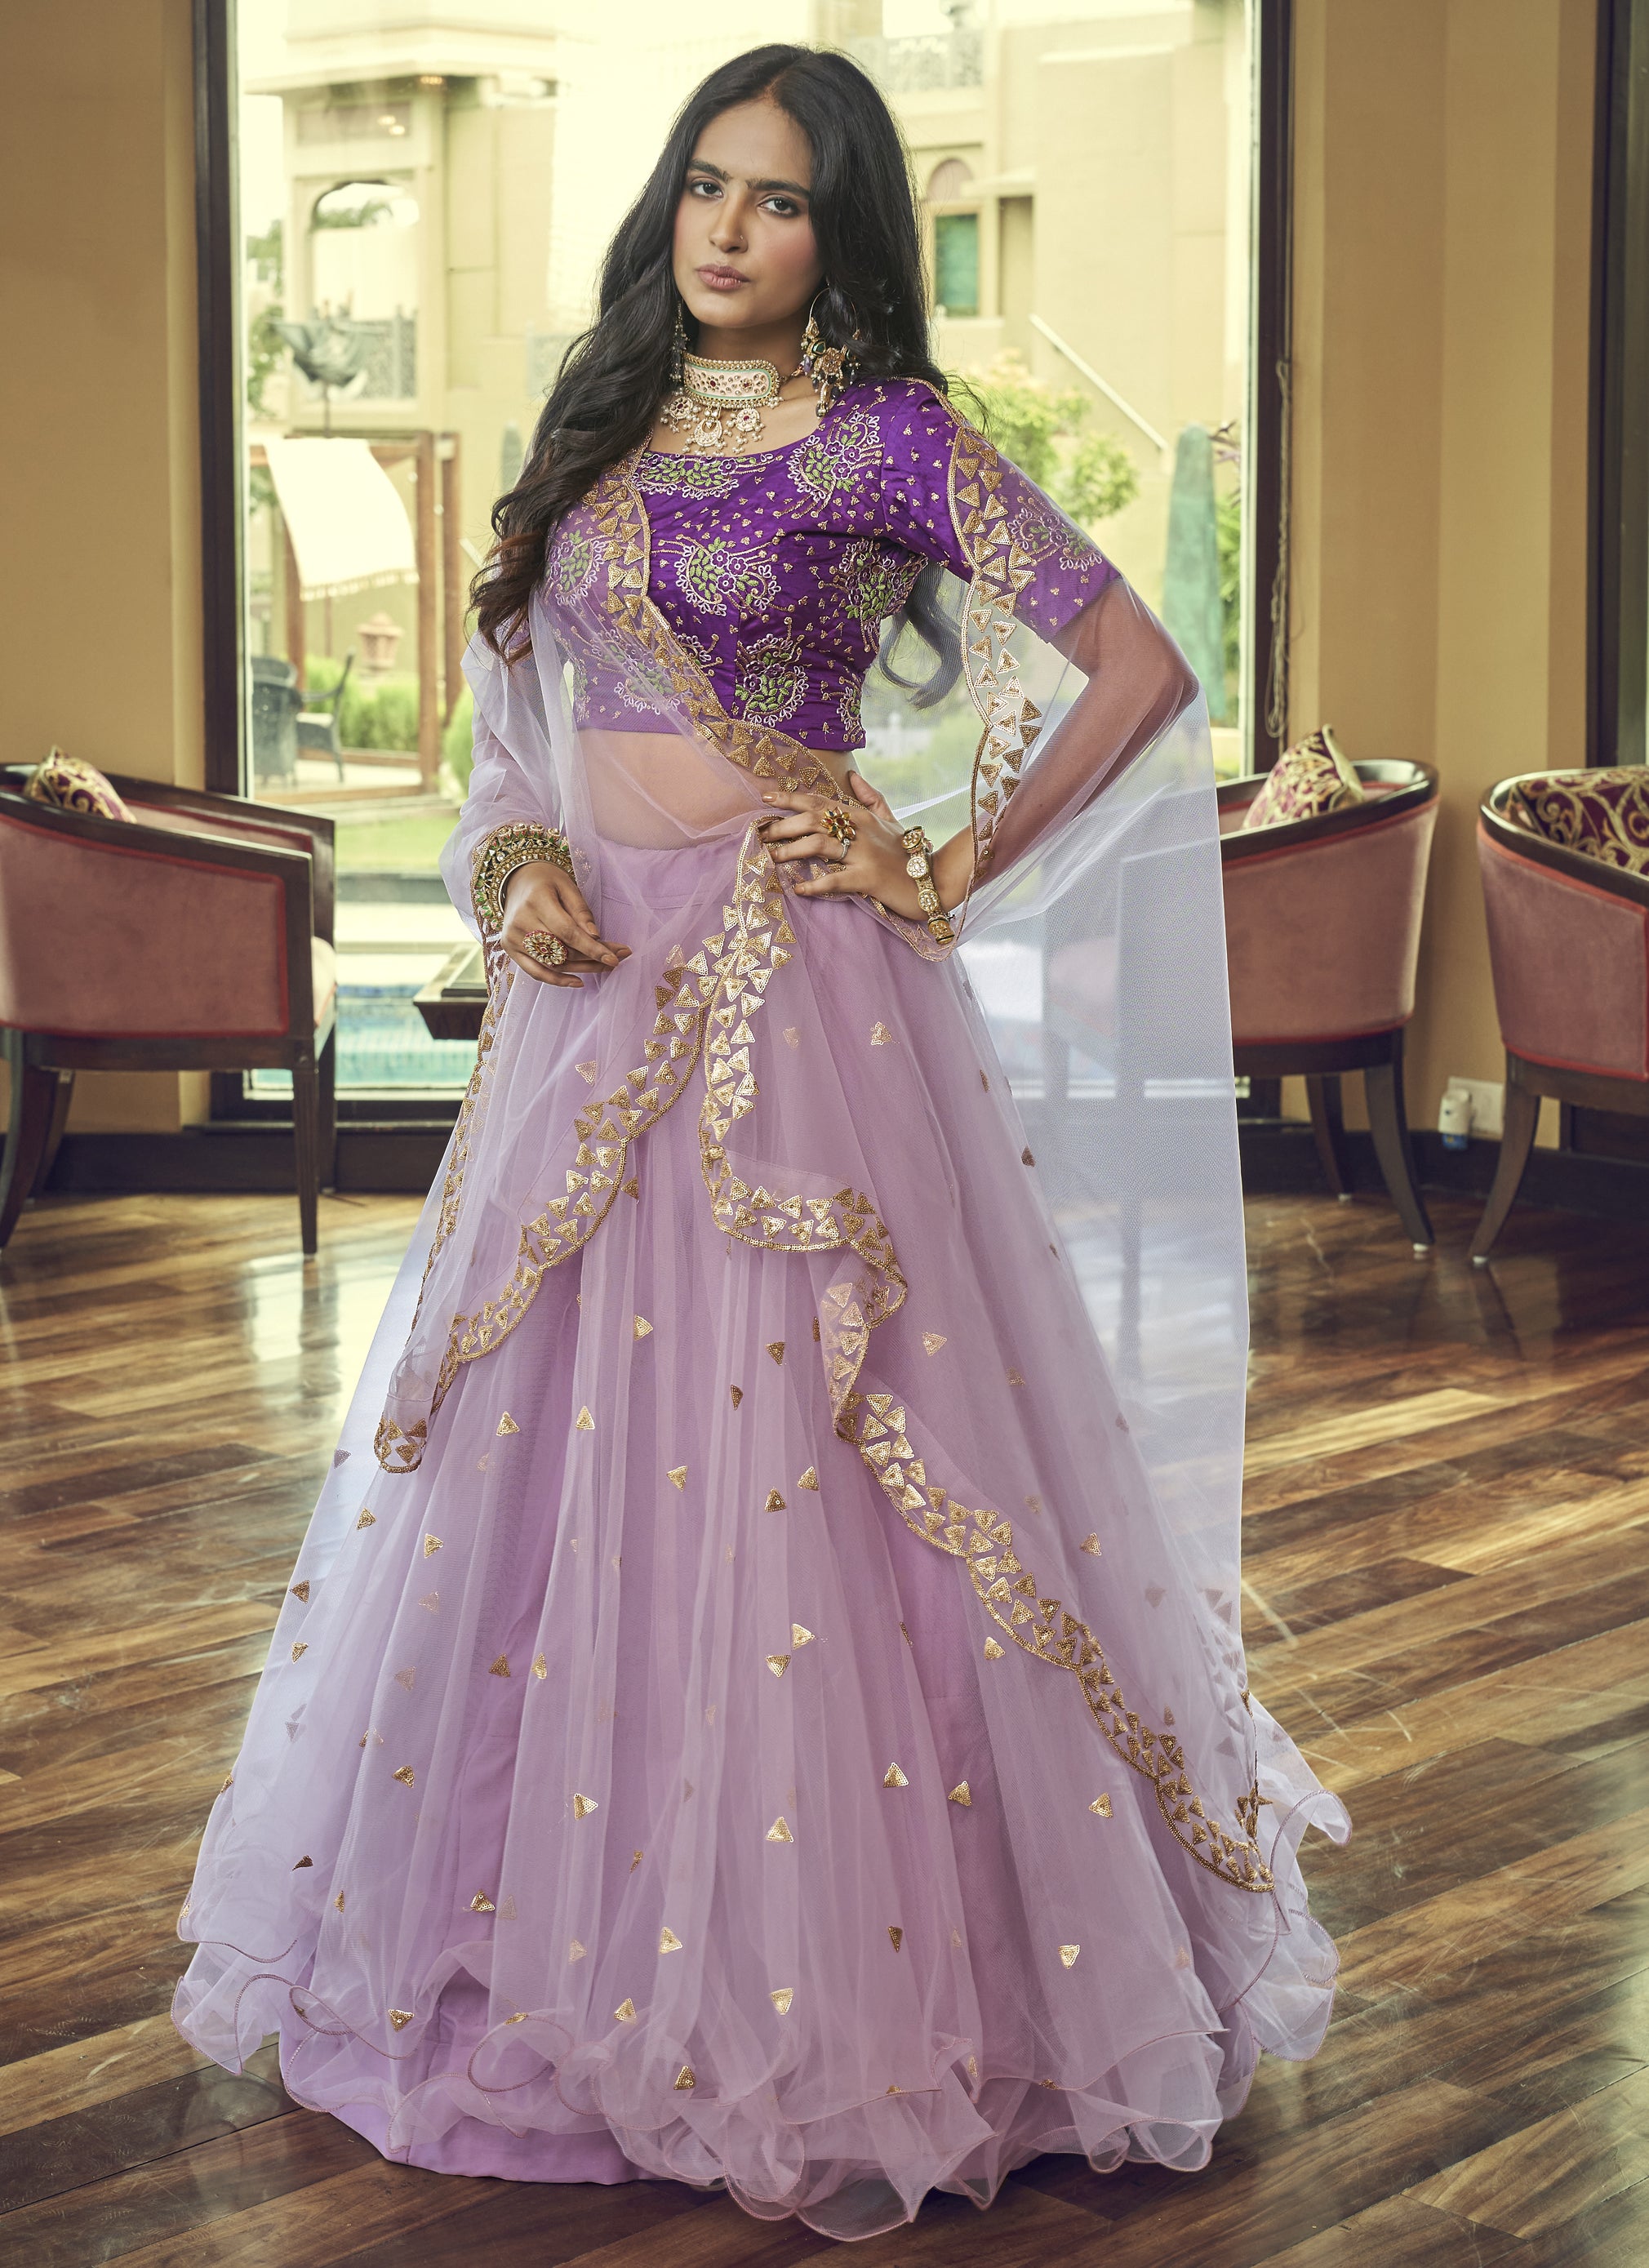 Top 22 Gorgeous Ghagra Choli Designs For Brides-To-Be